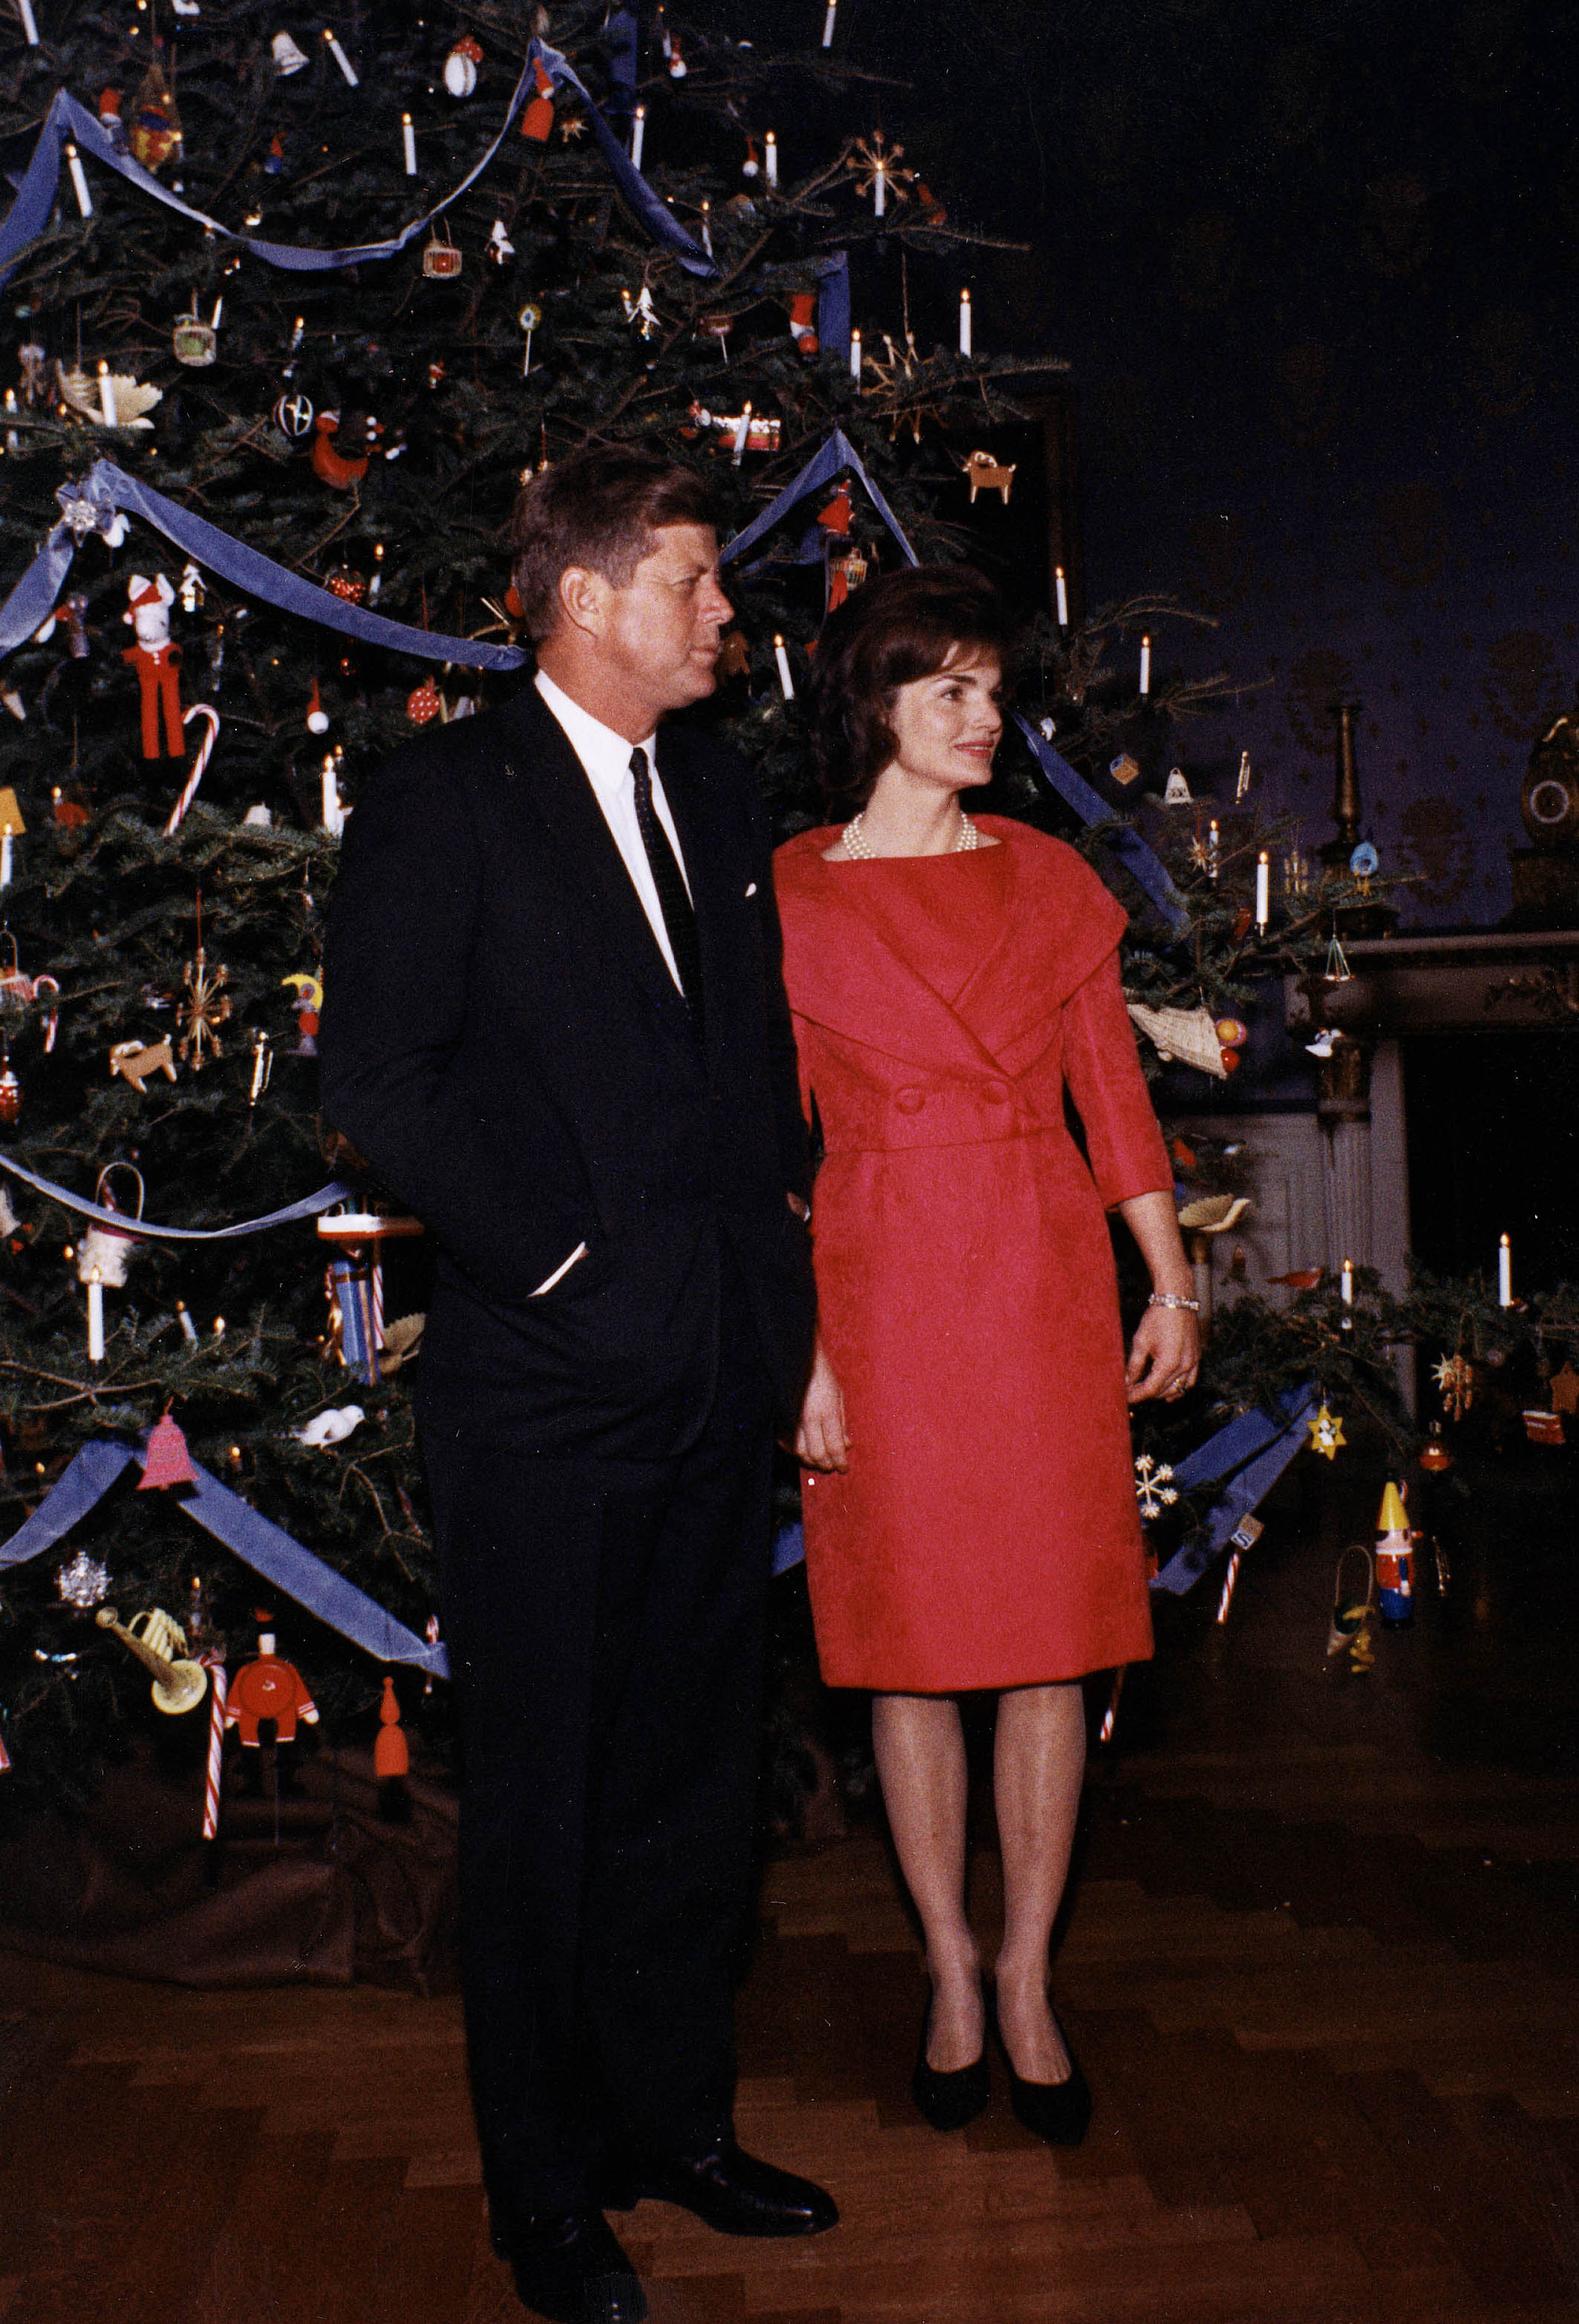 Jacqueline Kennedy introduced themes to the White House